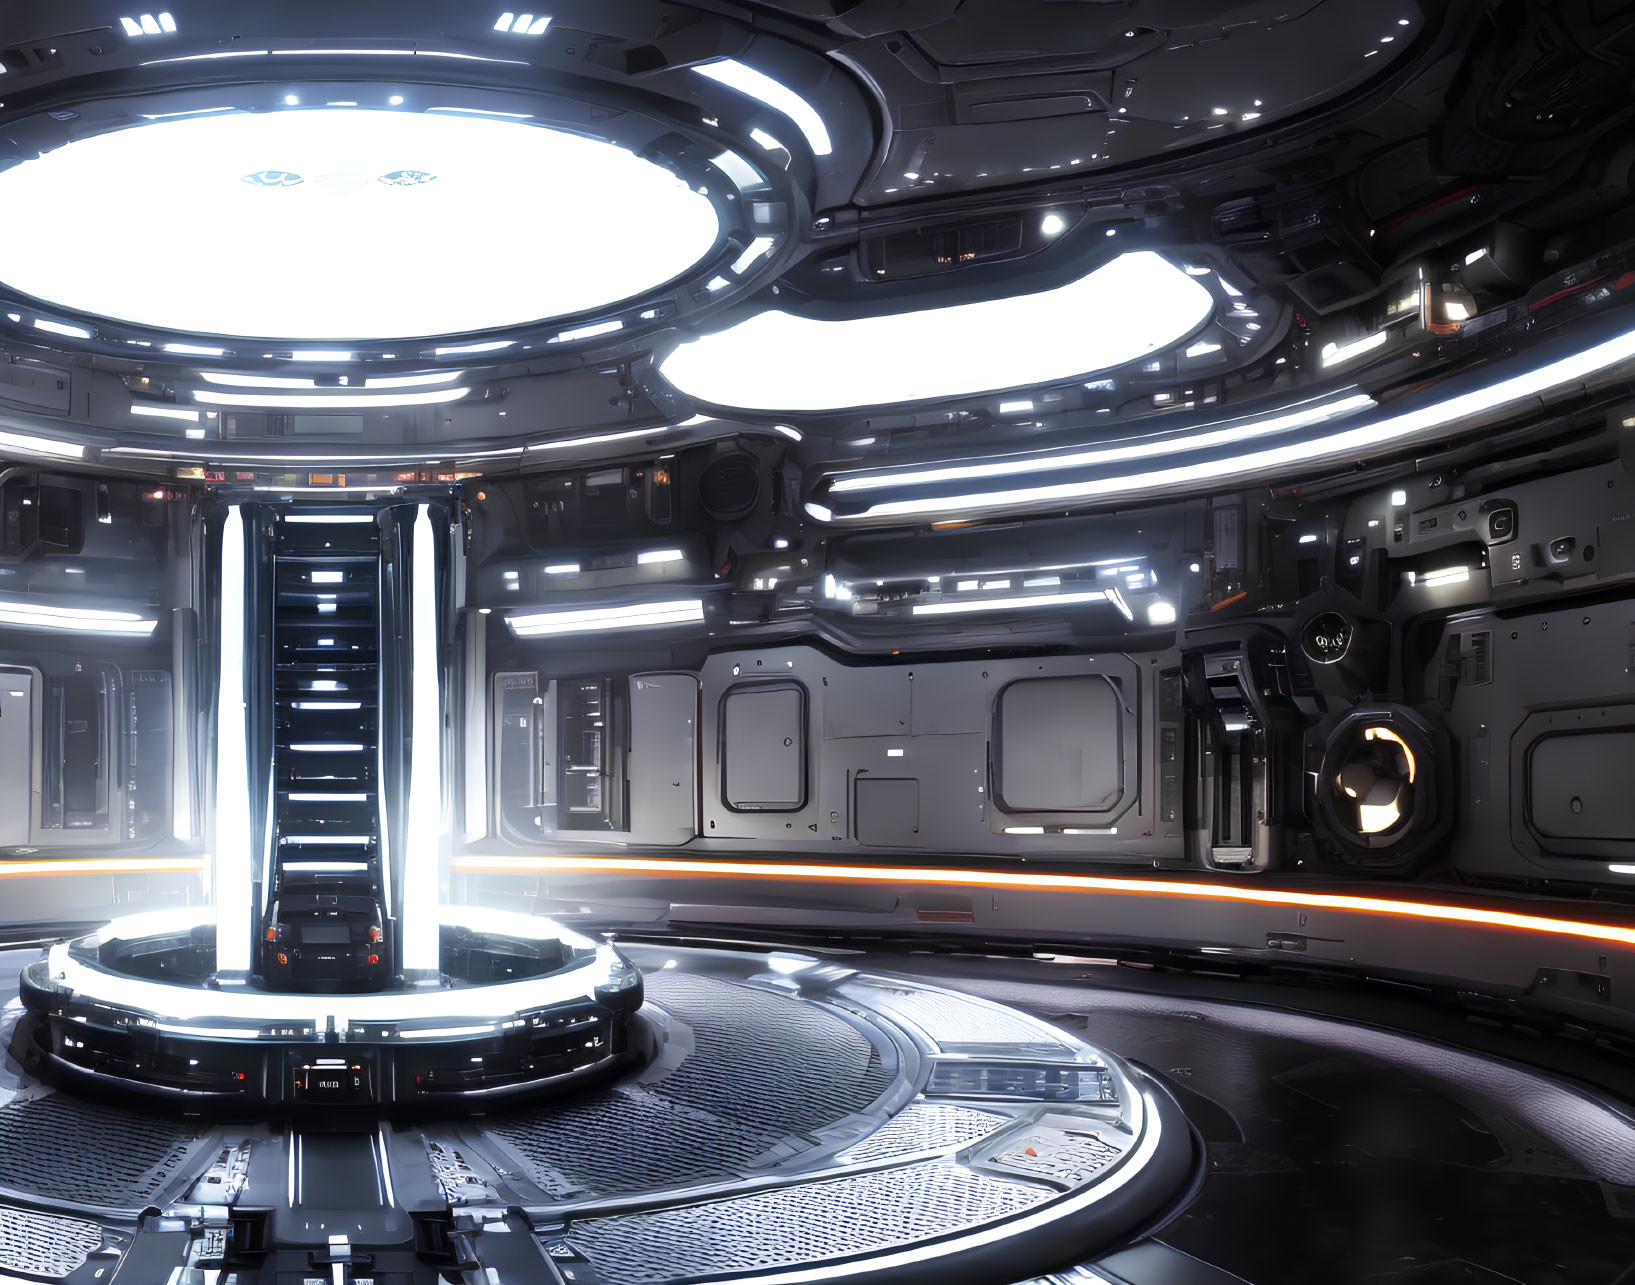 Futuristic spacecraft interior with glowing panels and circular lights